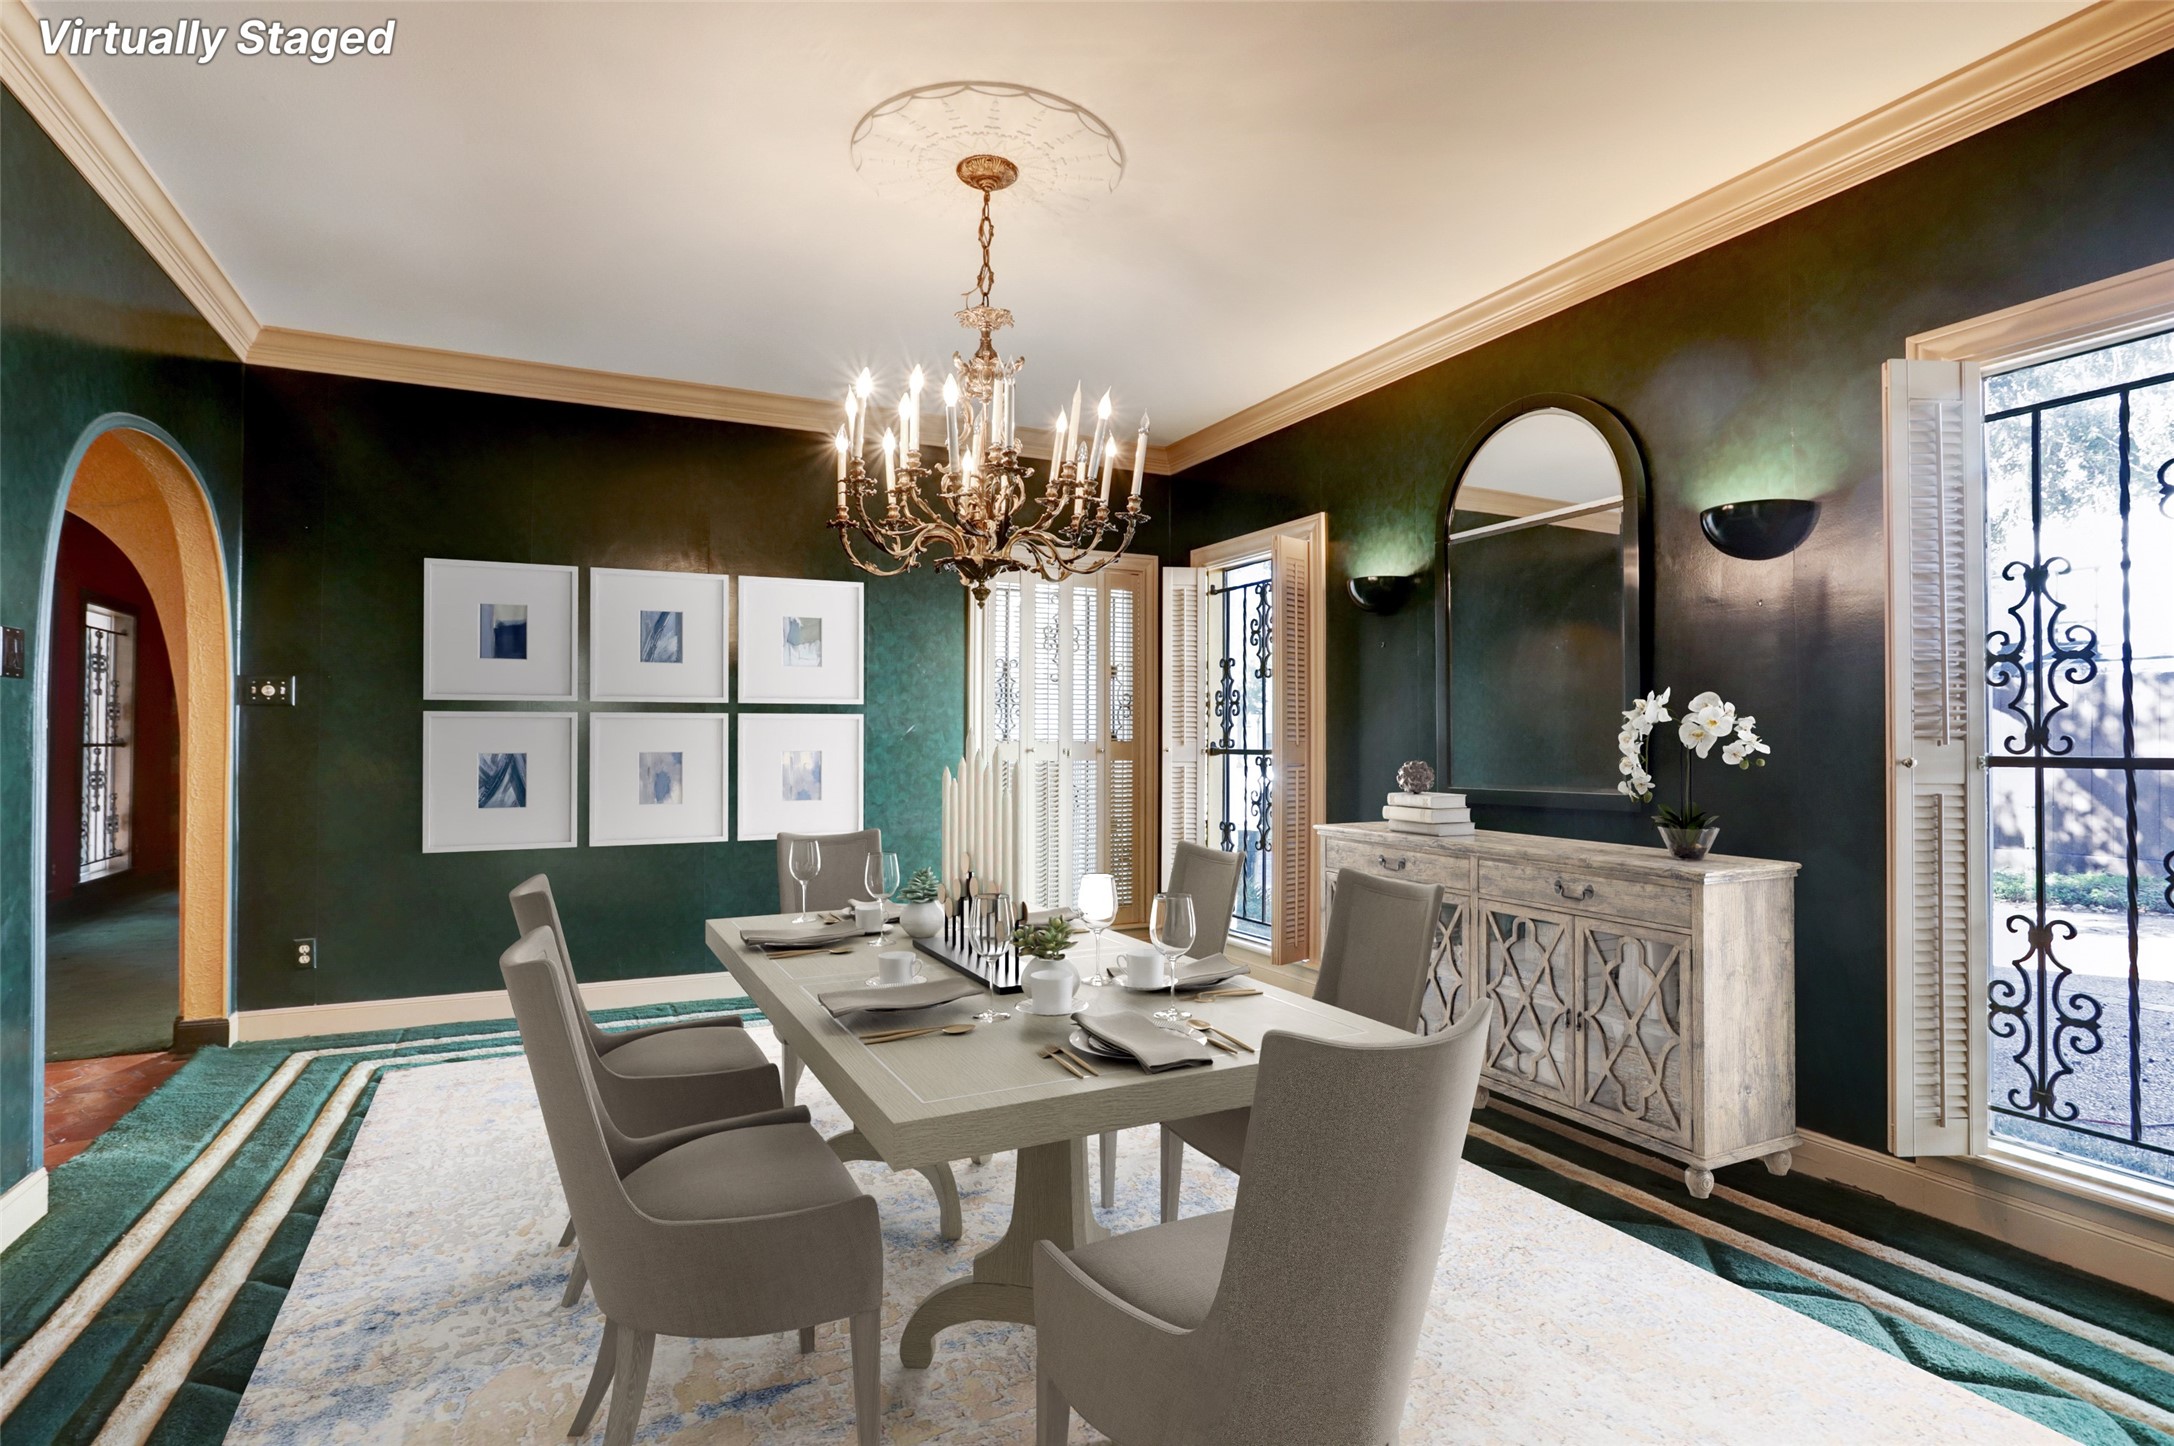 Virtually staged. Formal Dining Room allows direct access to the Kitchen for ease of entertaining.